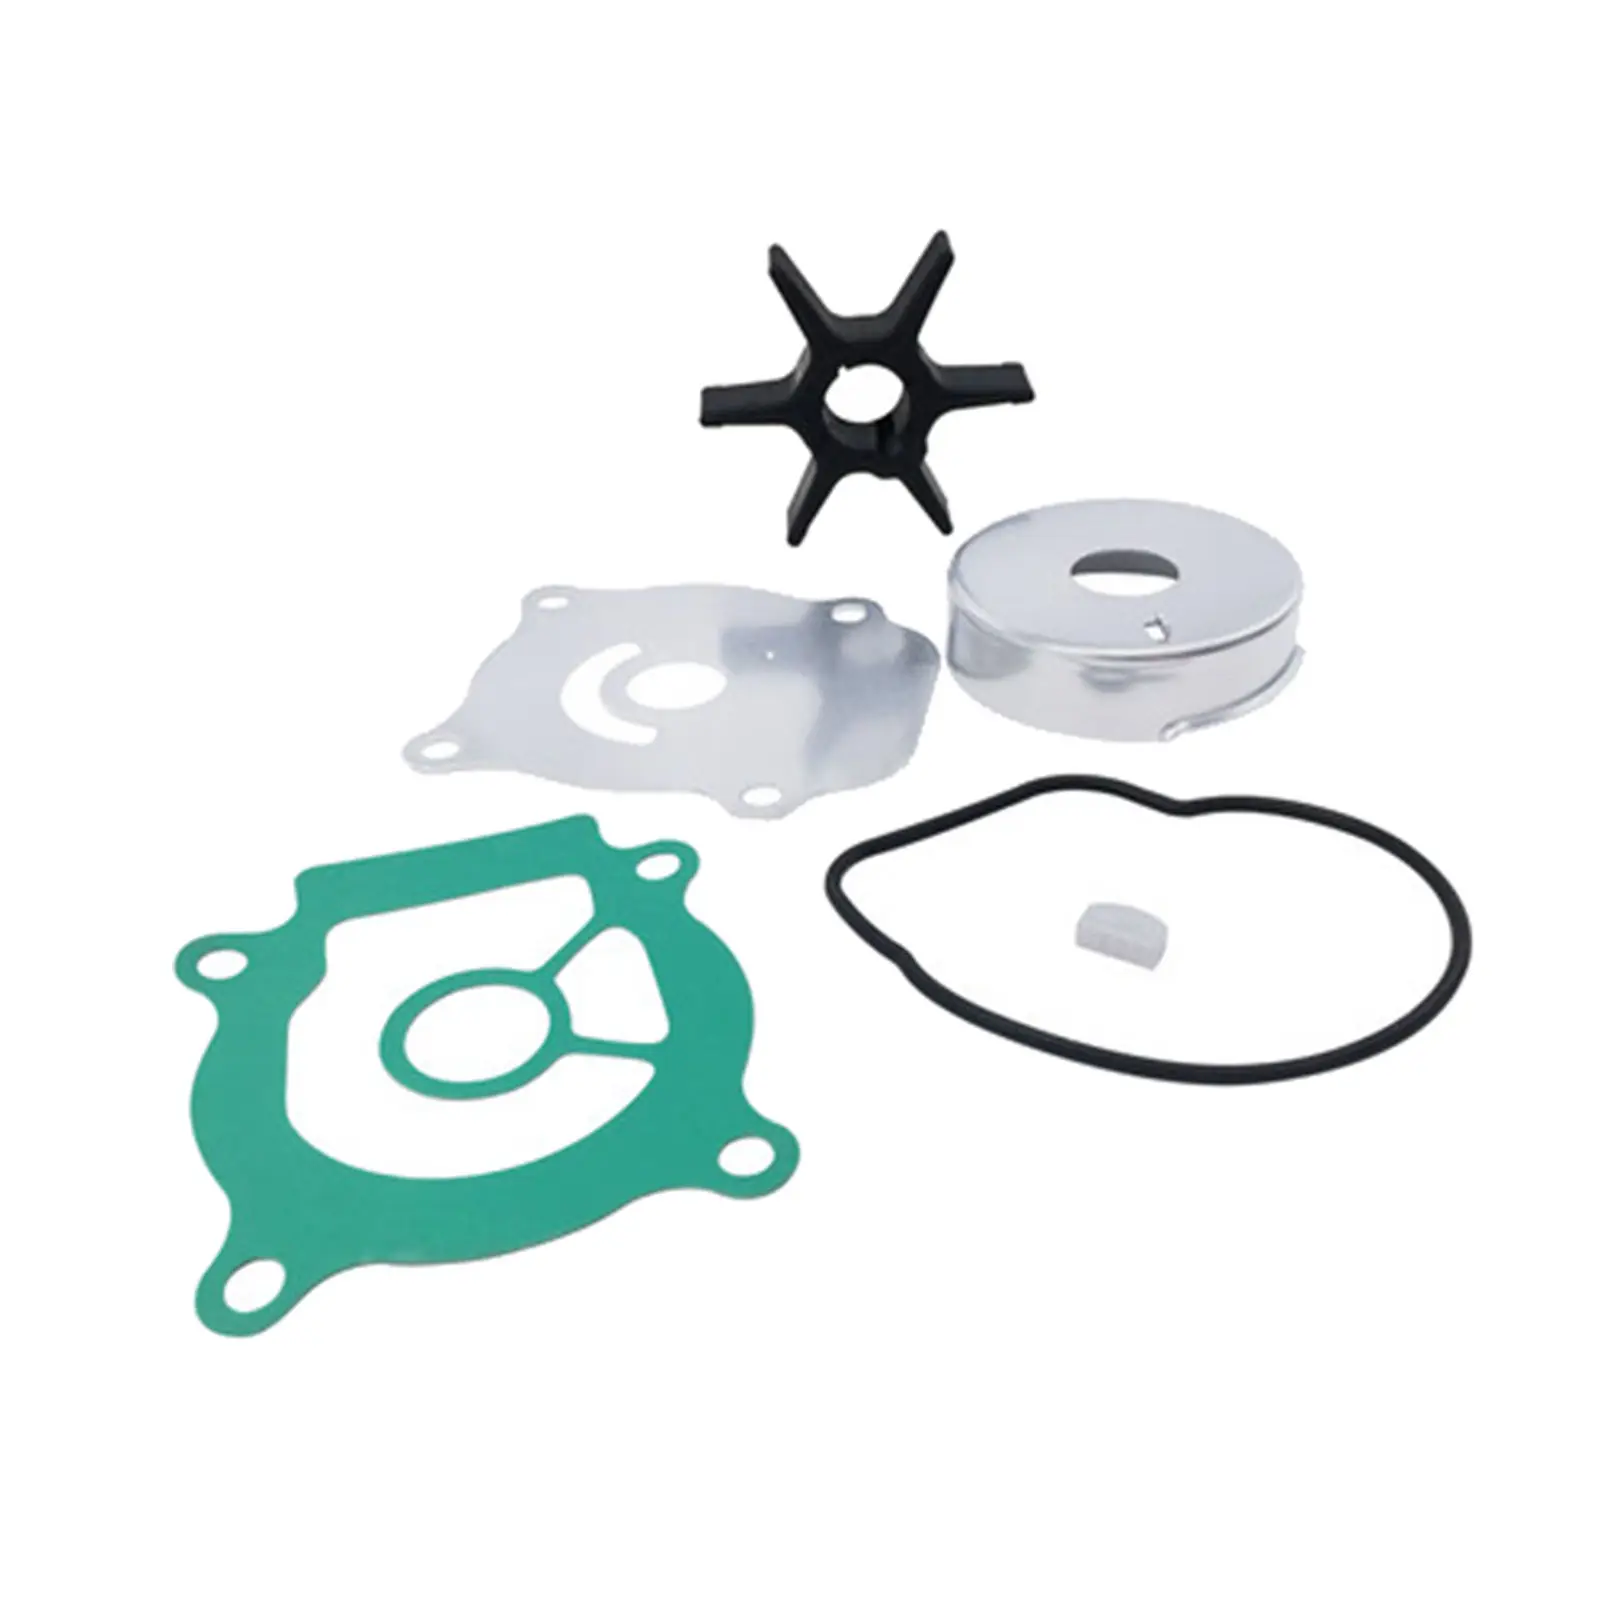 Water Pump Impeller Service Set 17400-88L00 fits for Suzuki Outboards, 40, 50, 60 HP, Easy to Install